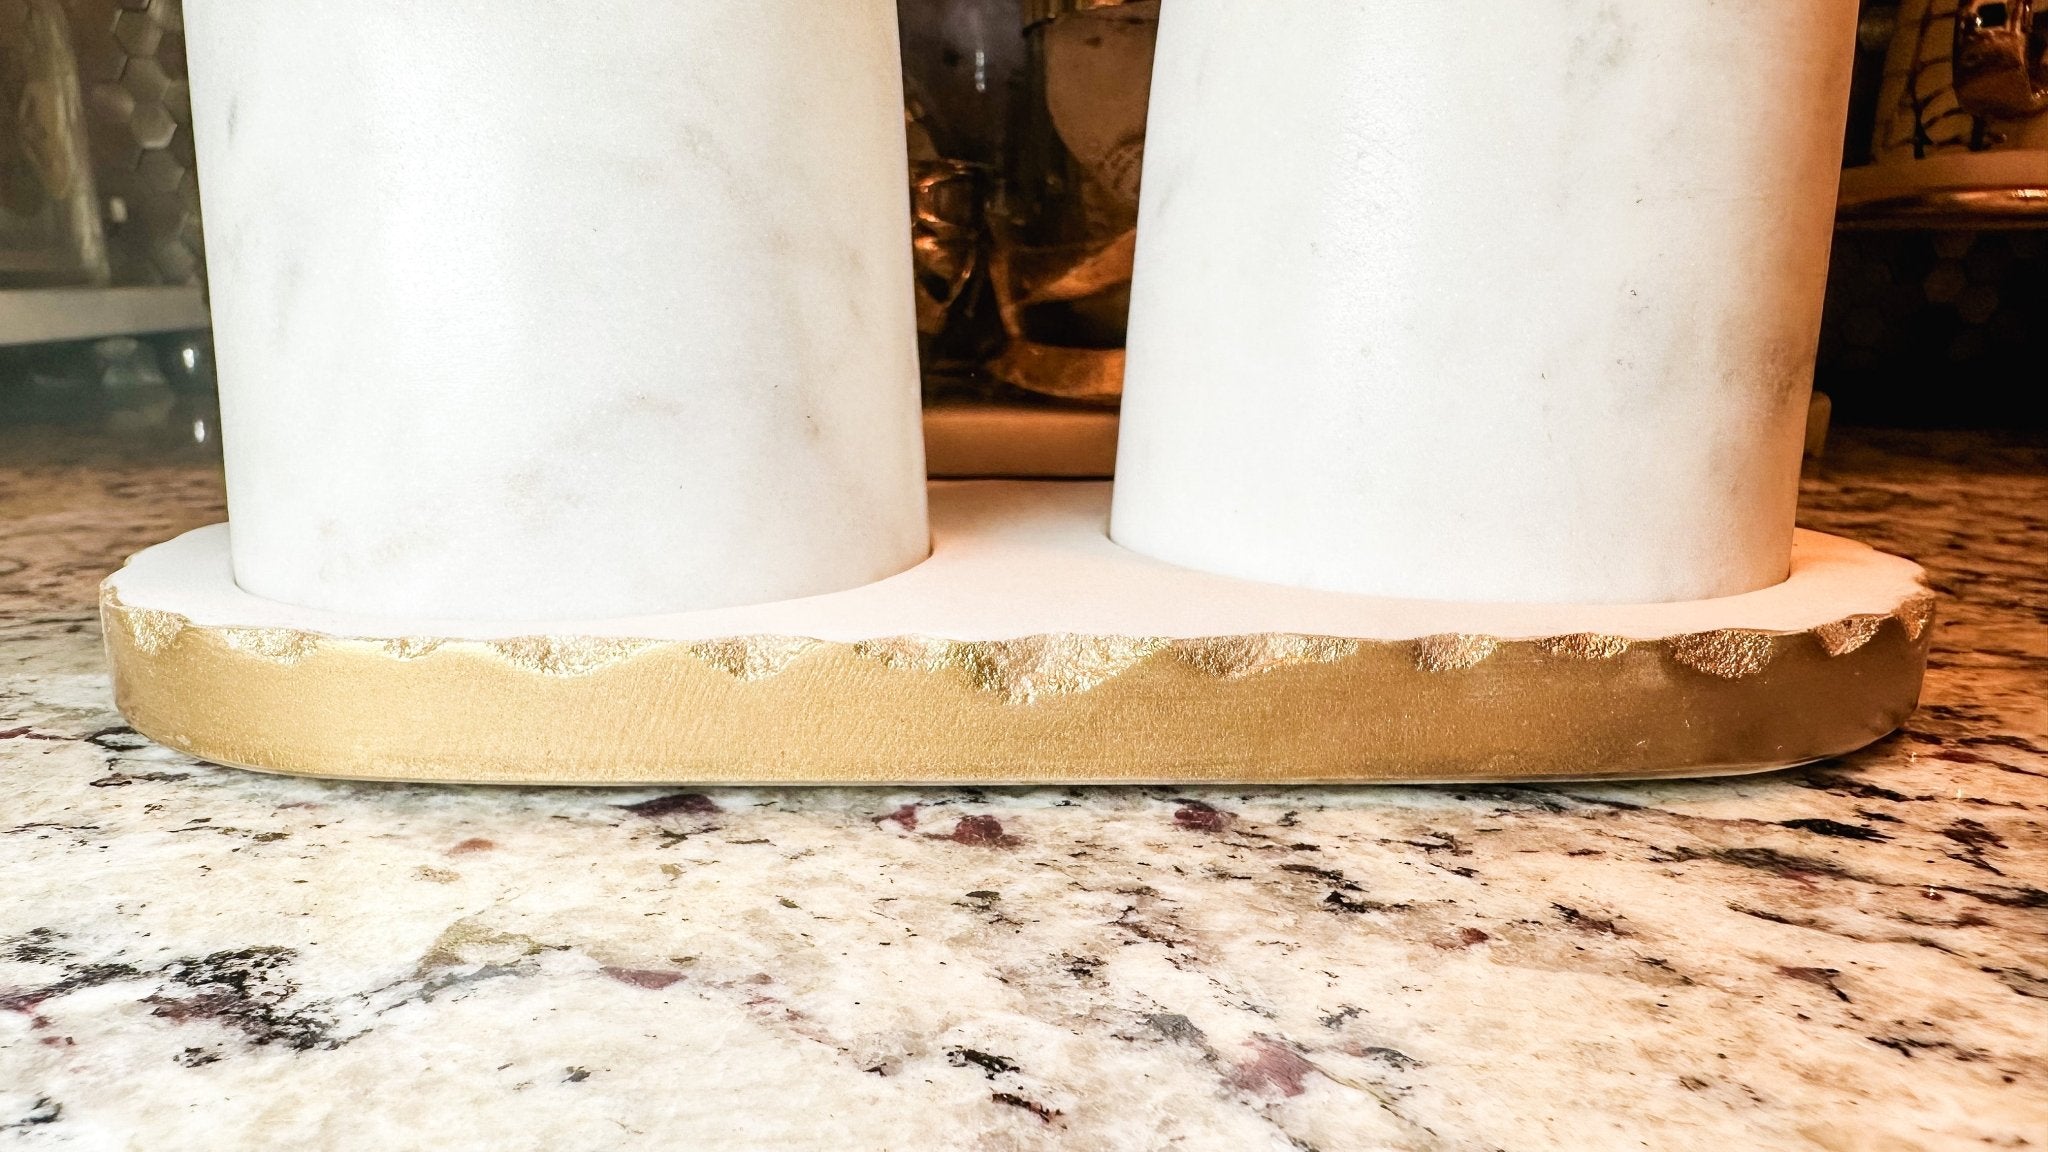 Large Hammered Gold and Marble Salt and Pepper Shaker Set with Marble Base - DiamondVale